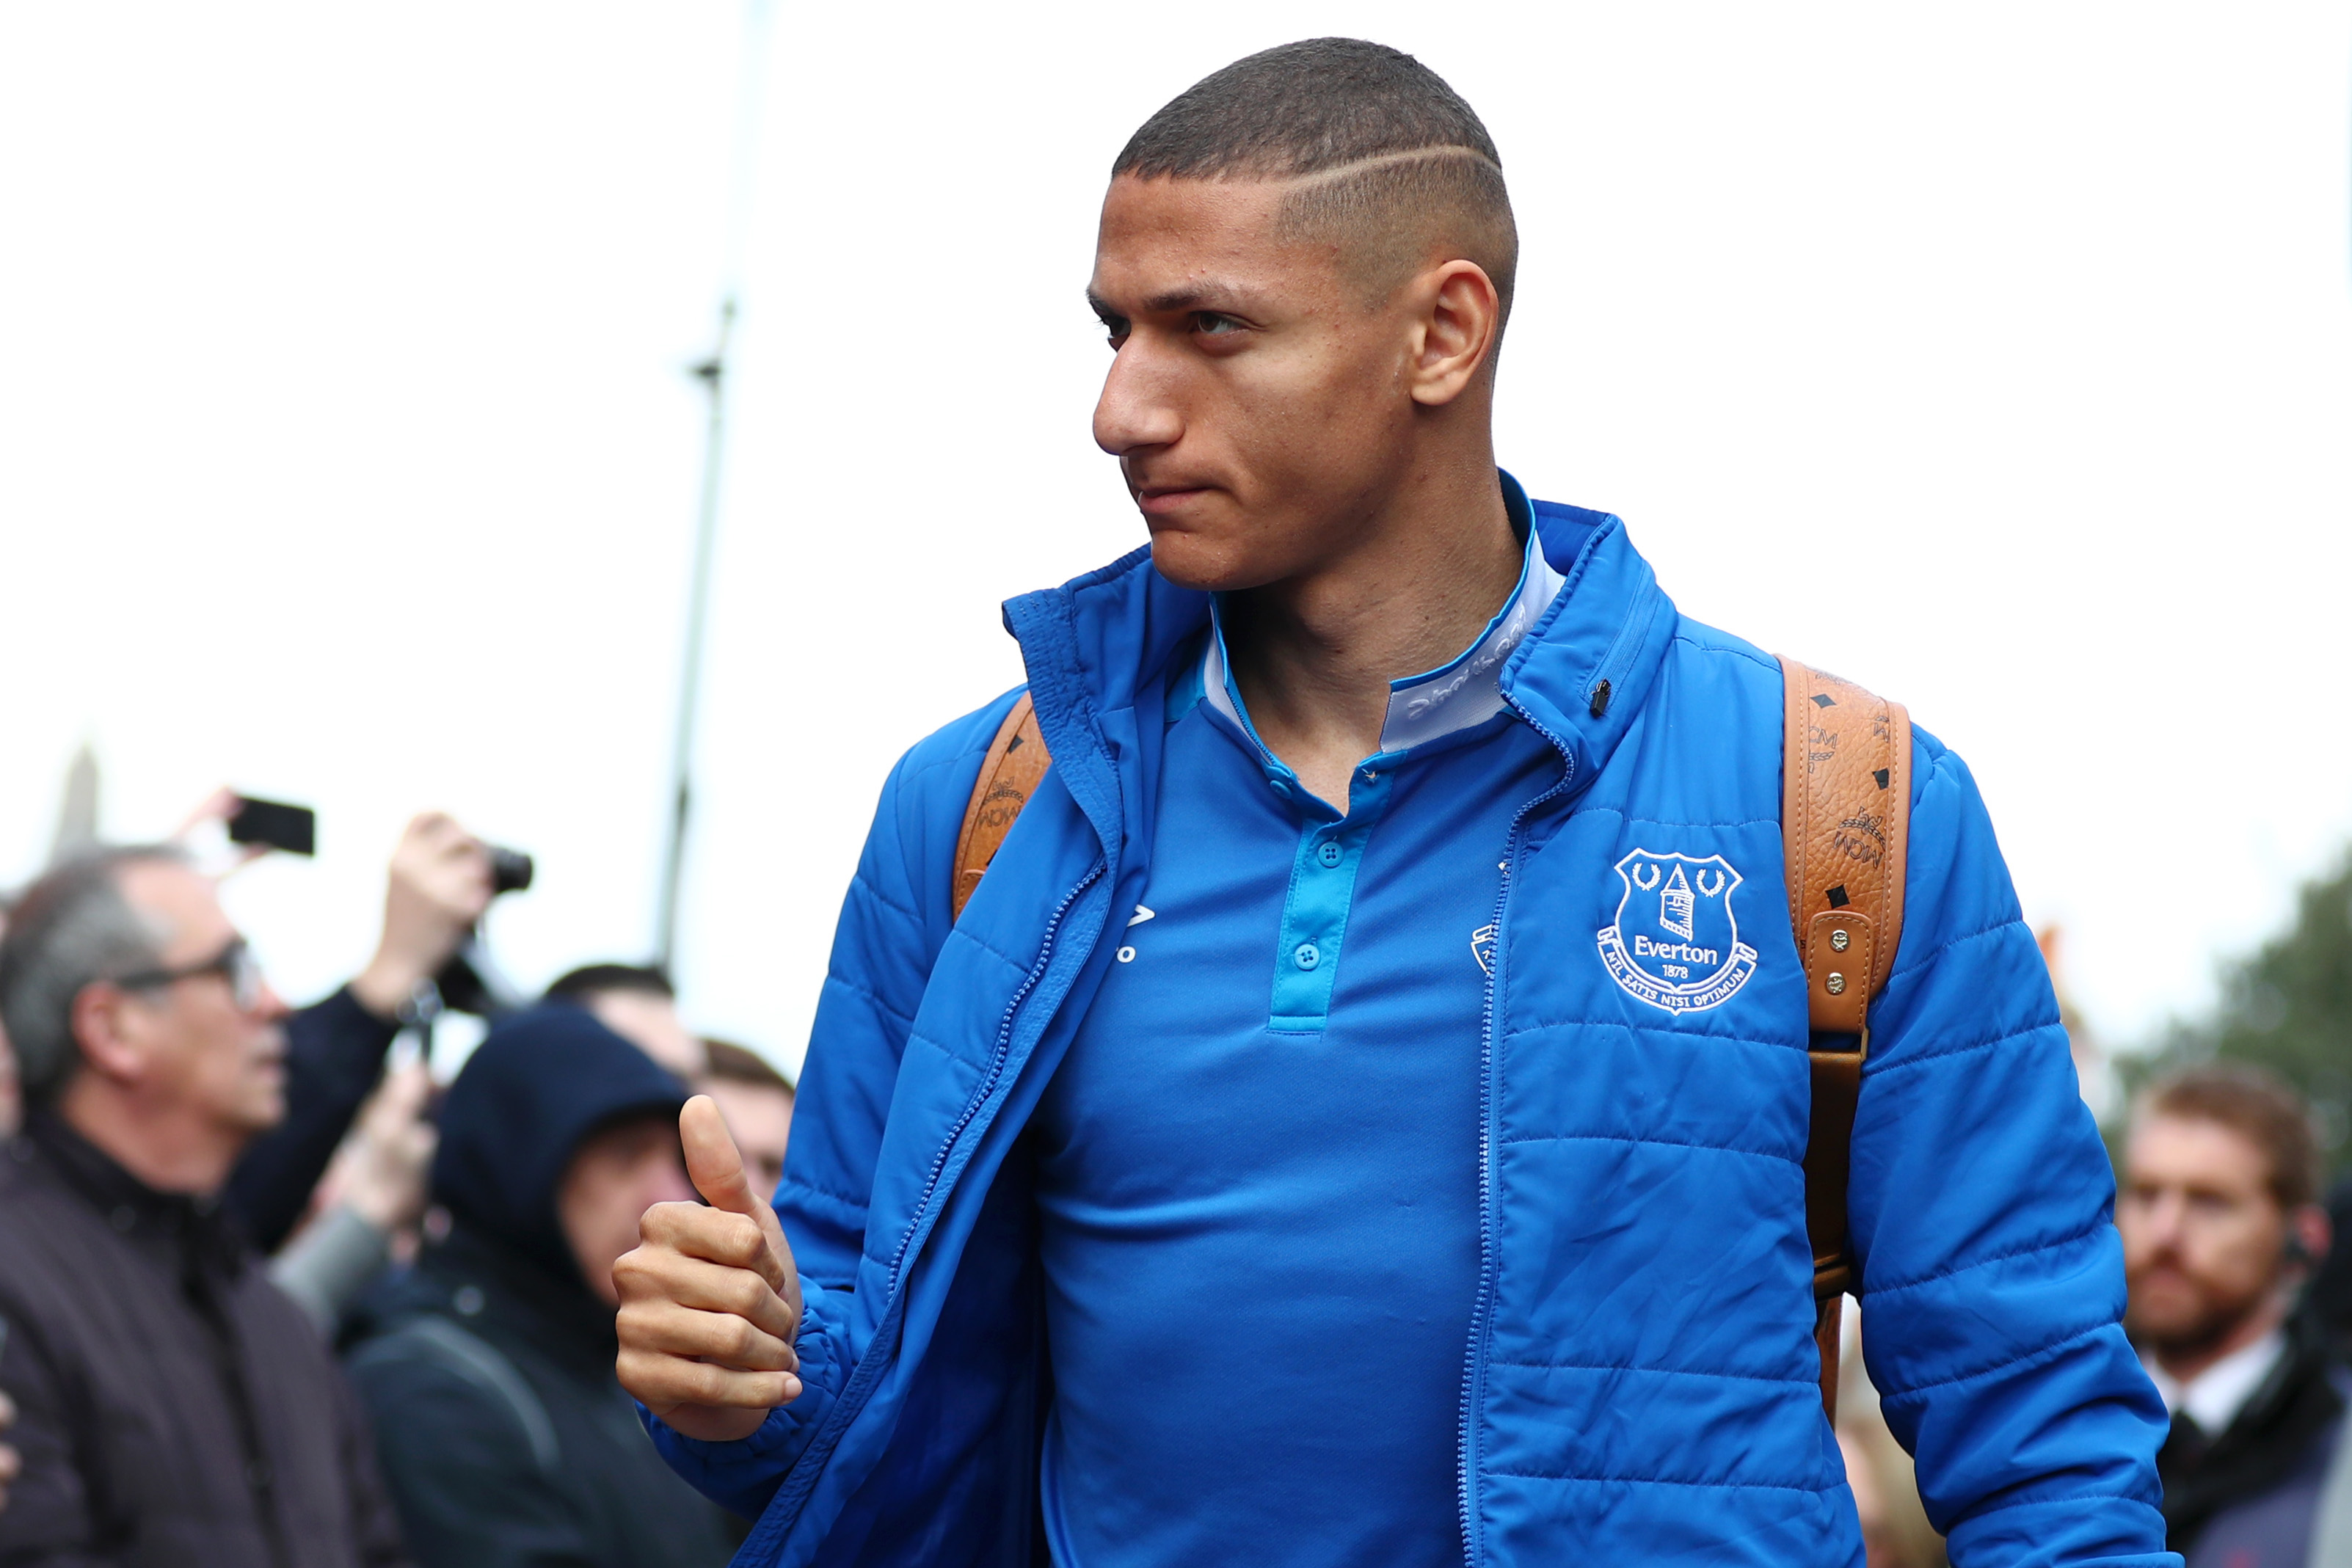 LONDON, ENGLAND - APRIL 13: Richarlison of Everton arrives at the stadium prior to the Premier League match between Fulham FC and Everton FC at Craven Cottage on April 13, 2019 in London, United Kingdom. (Photo by Clive Rose/Getty Images)